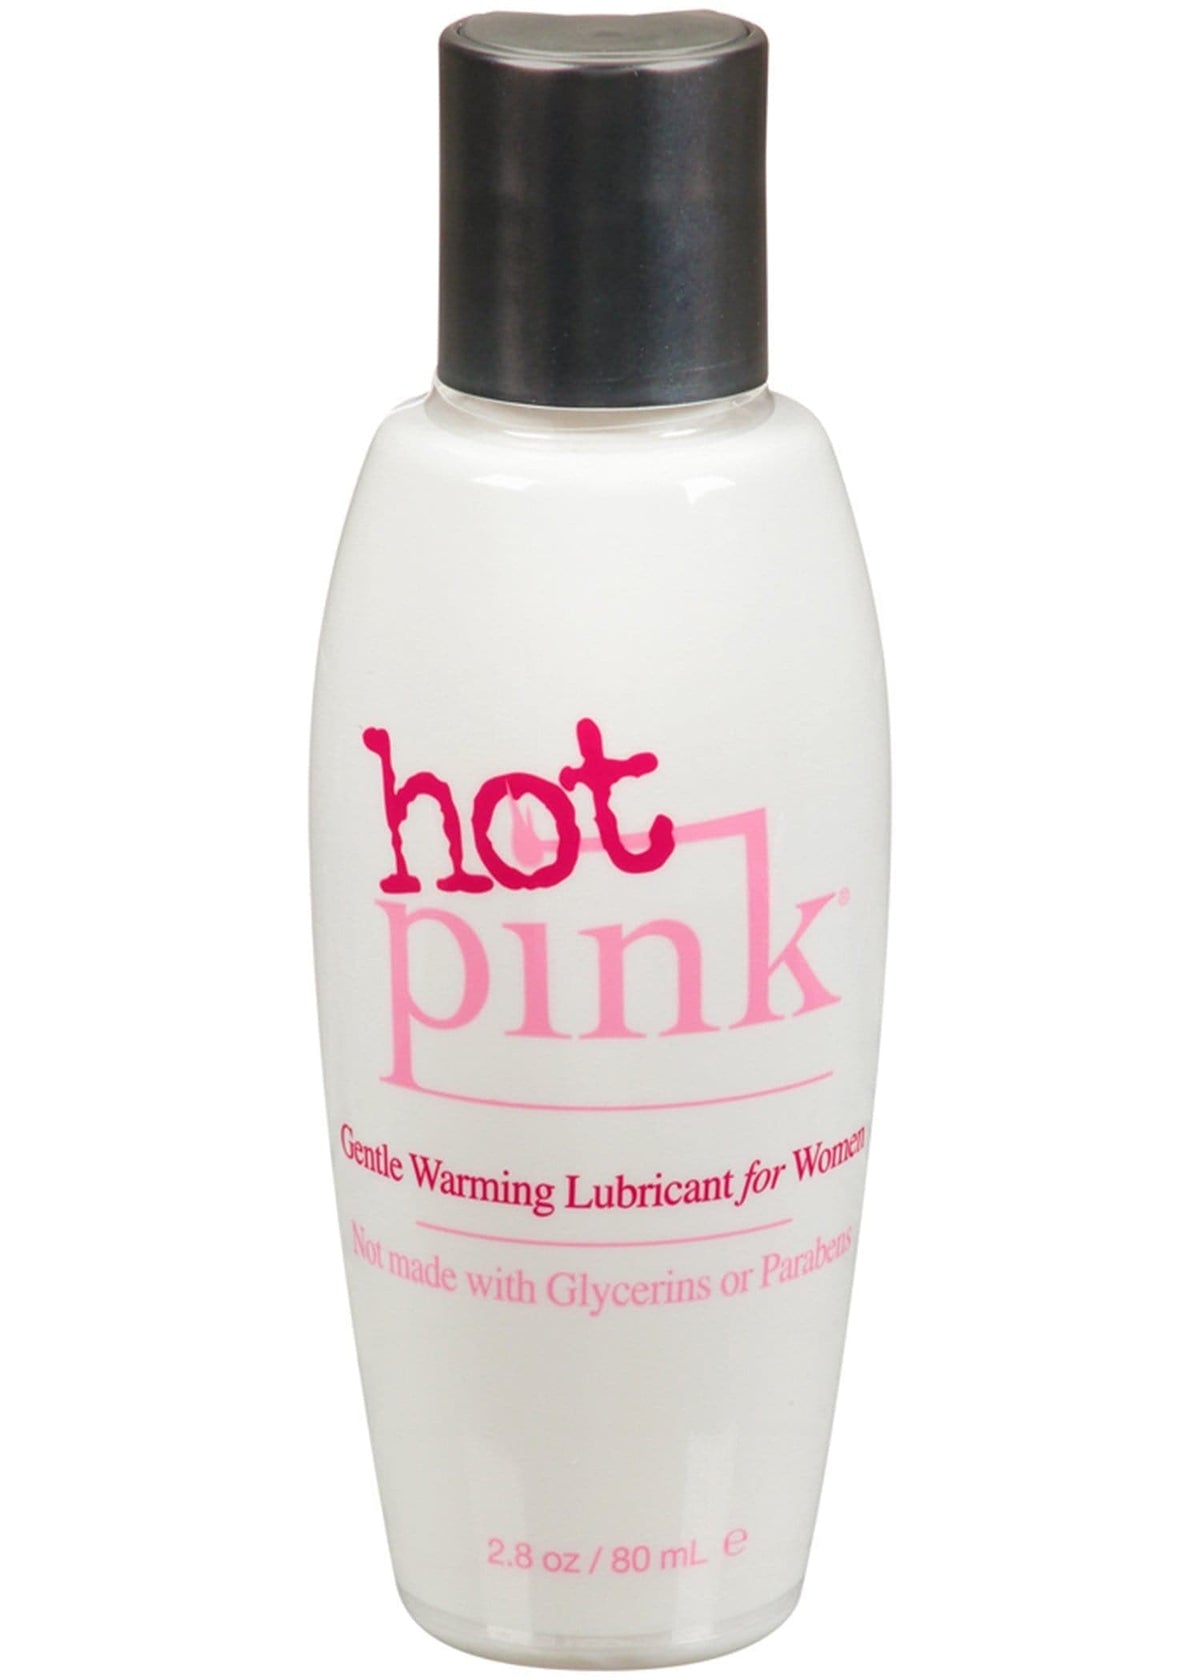 hot pink warming lubricant for women 2 8 oz 80 ml